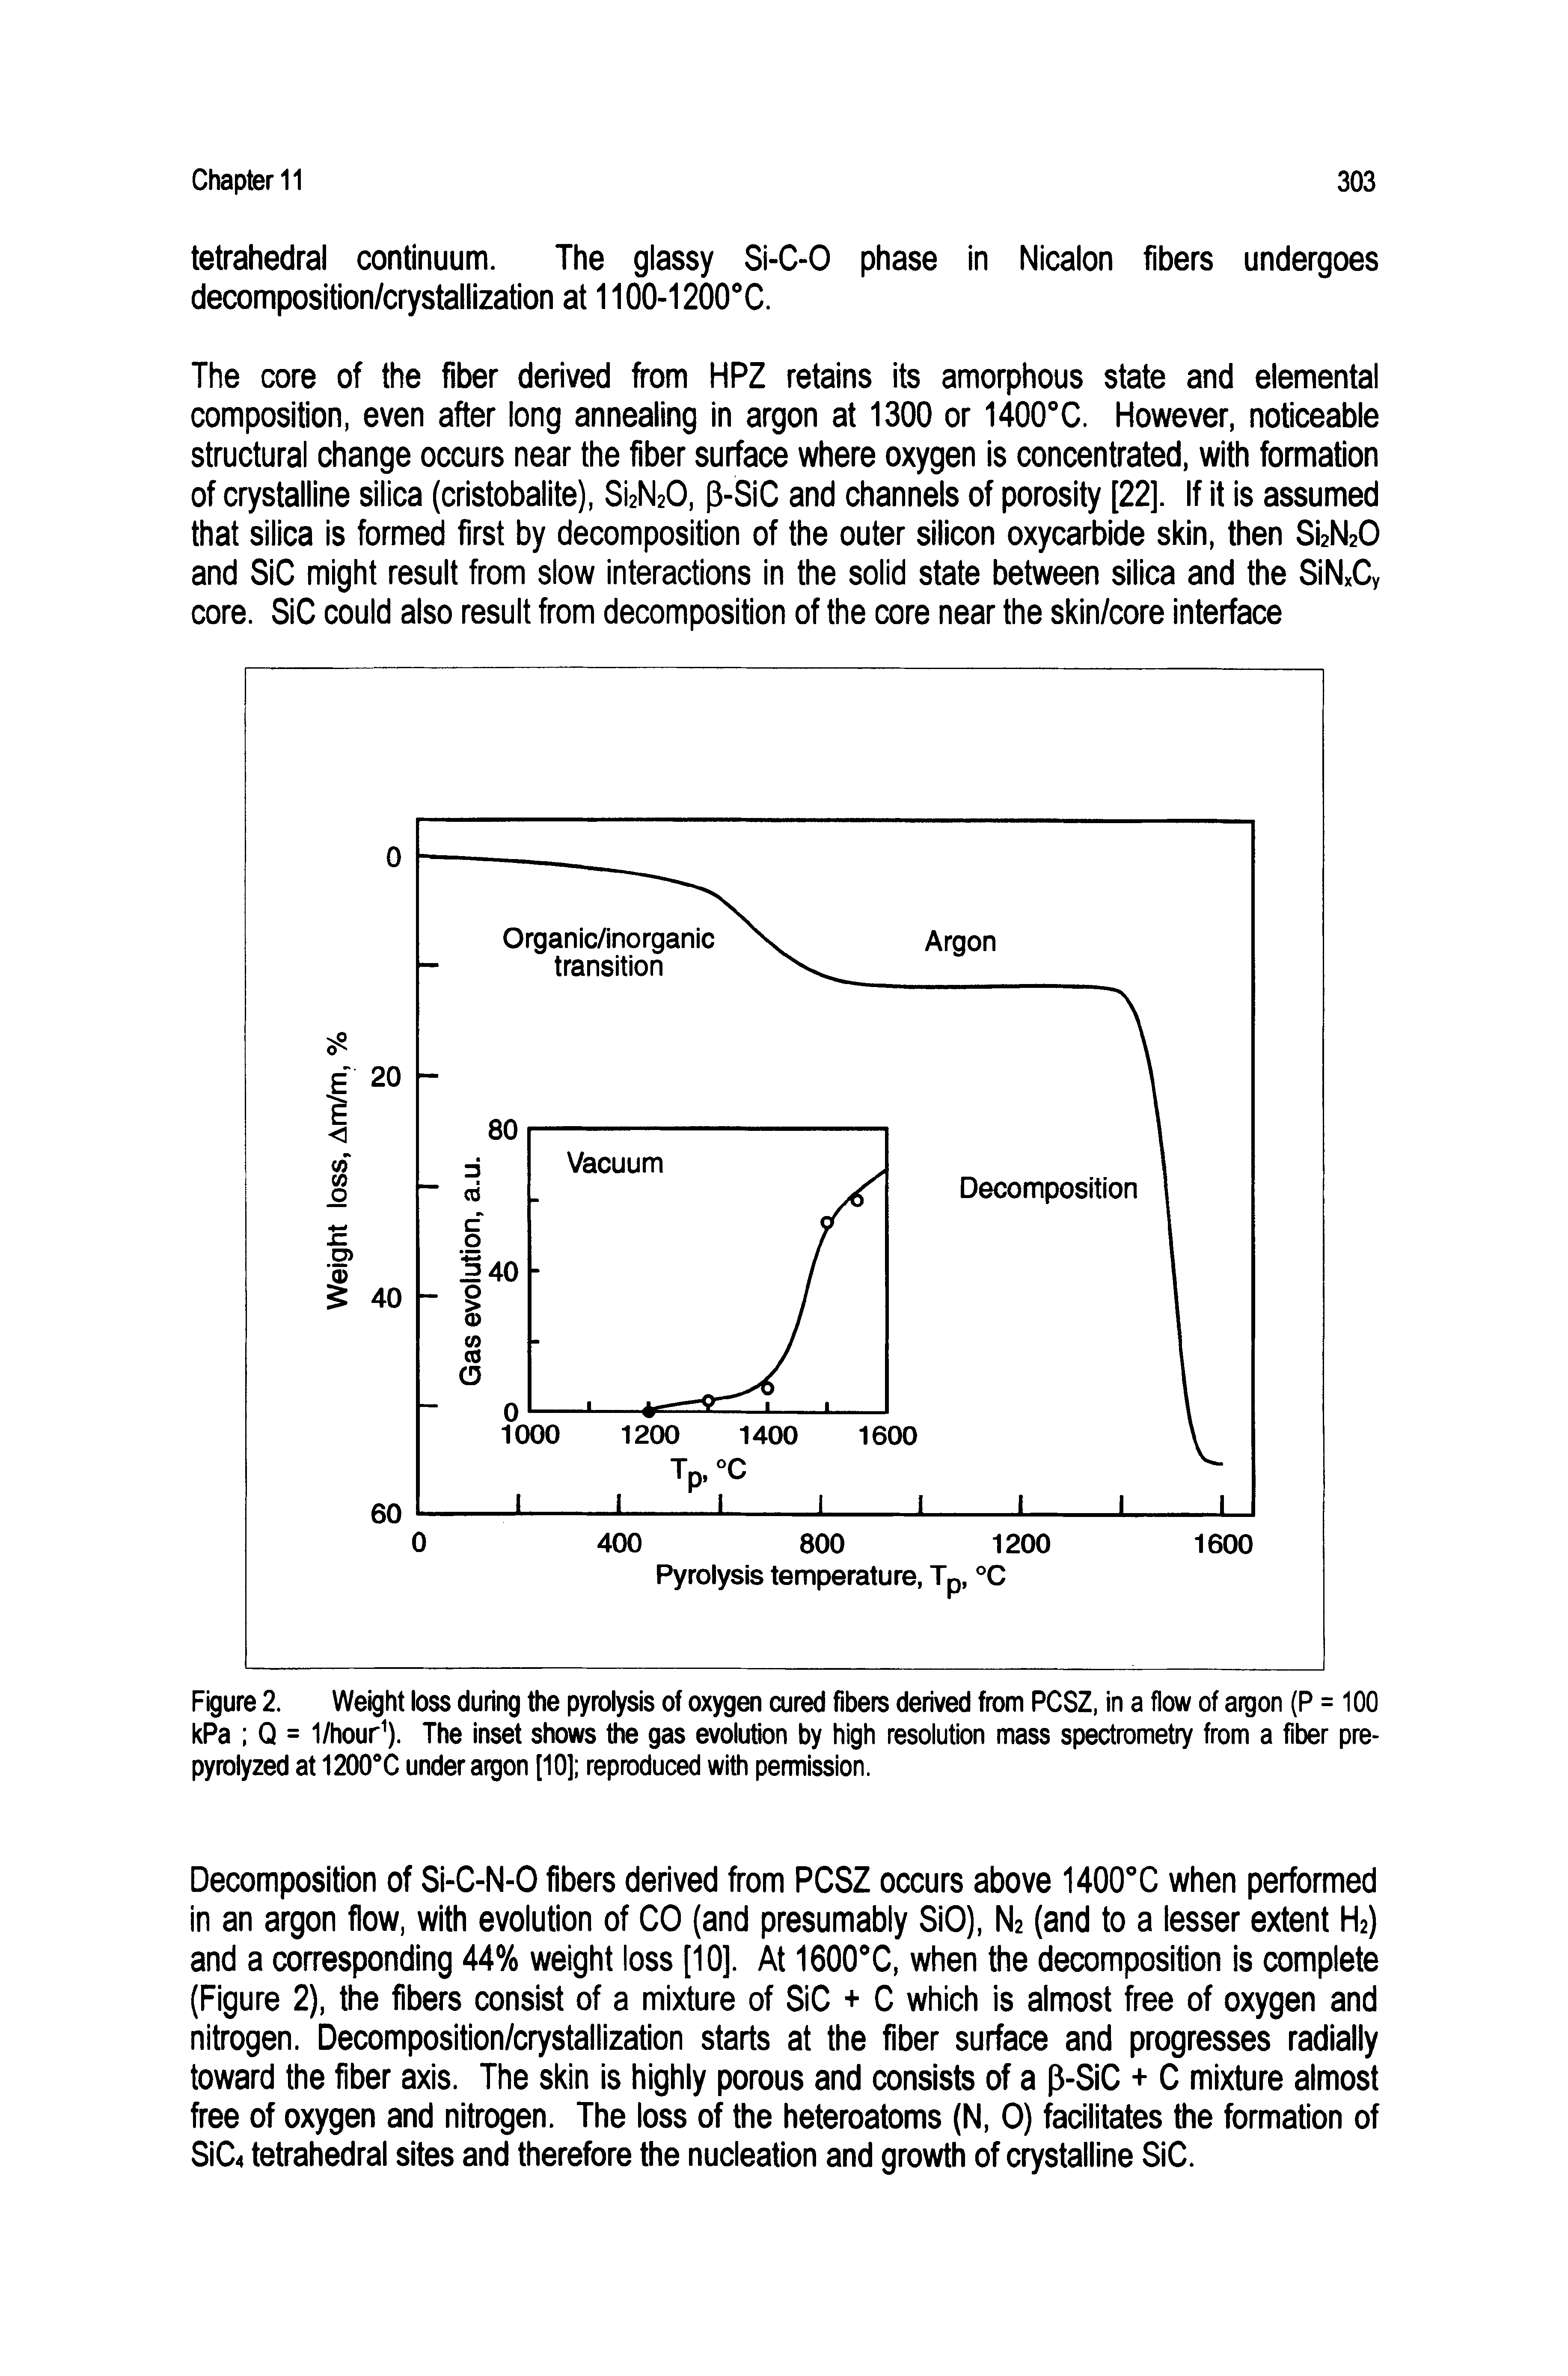 Figure 2. Weight loss during the pyrolysis of oxygen cured fibers derived from PCSZ, In a flow of argon (P = 100 kPa Q = 1/hour ). The inset shows the gas evolution by high resolution mass spectrometry from a fiber pre-pyrolyzed at 1200 C under argon [10] reproduced with permission.